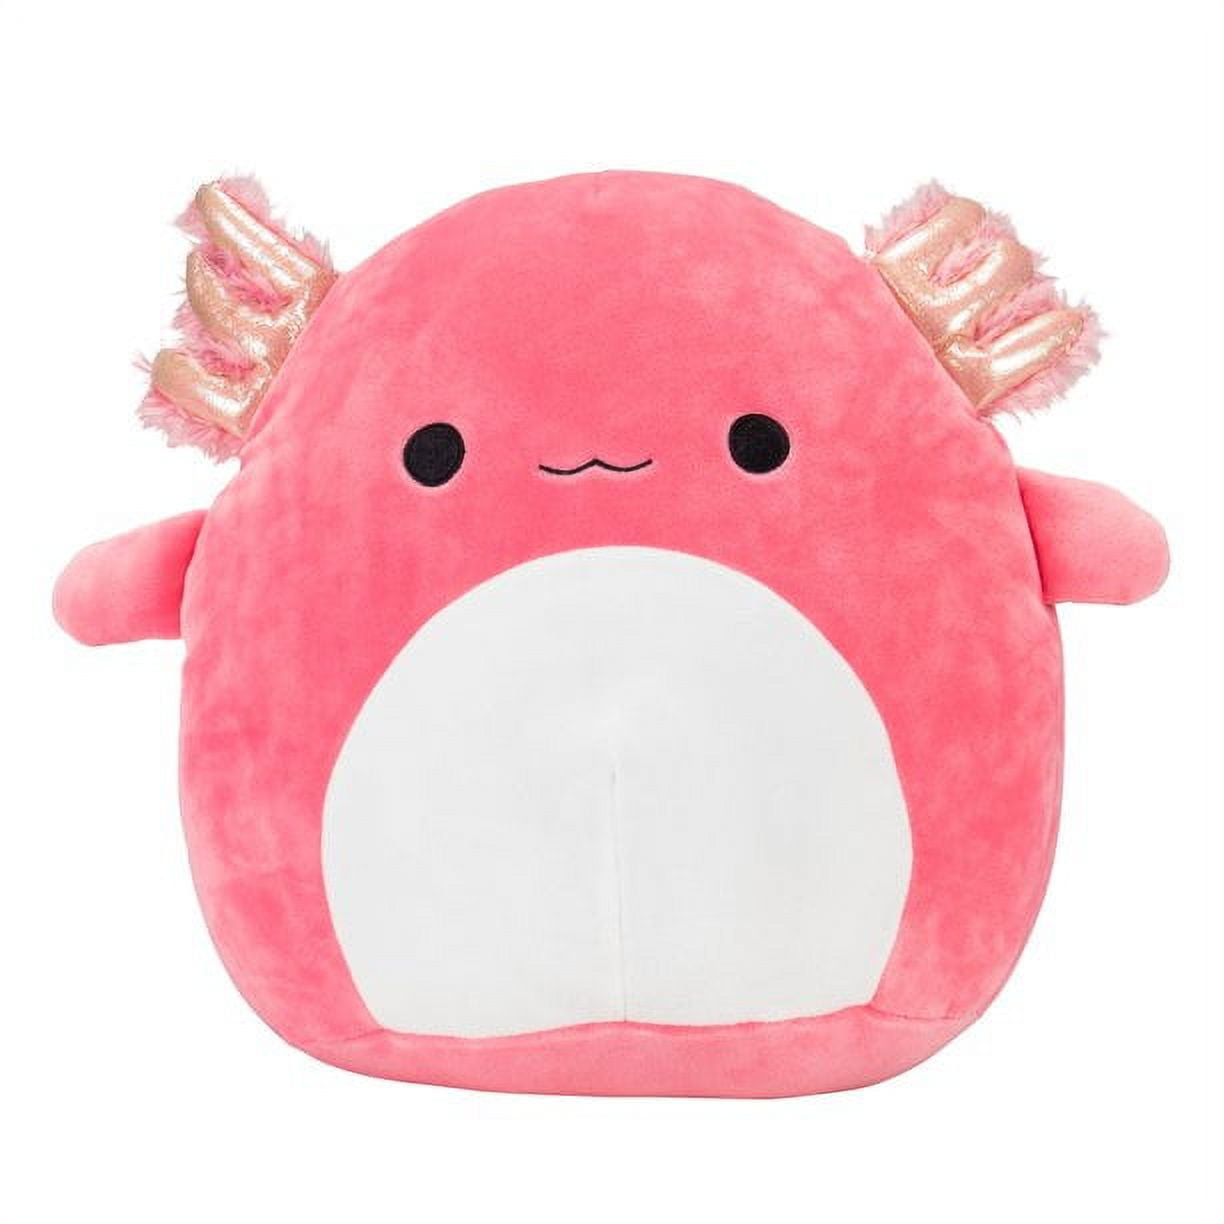 Squishmallows Adabelle The Strawberry Frog 8 inch Plush, Pink